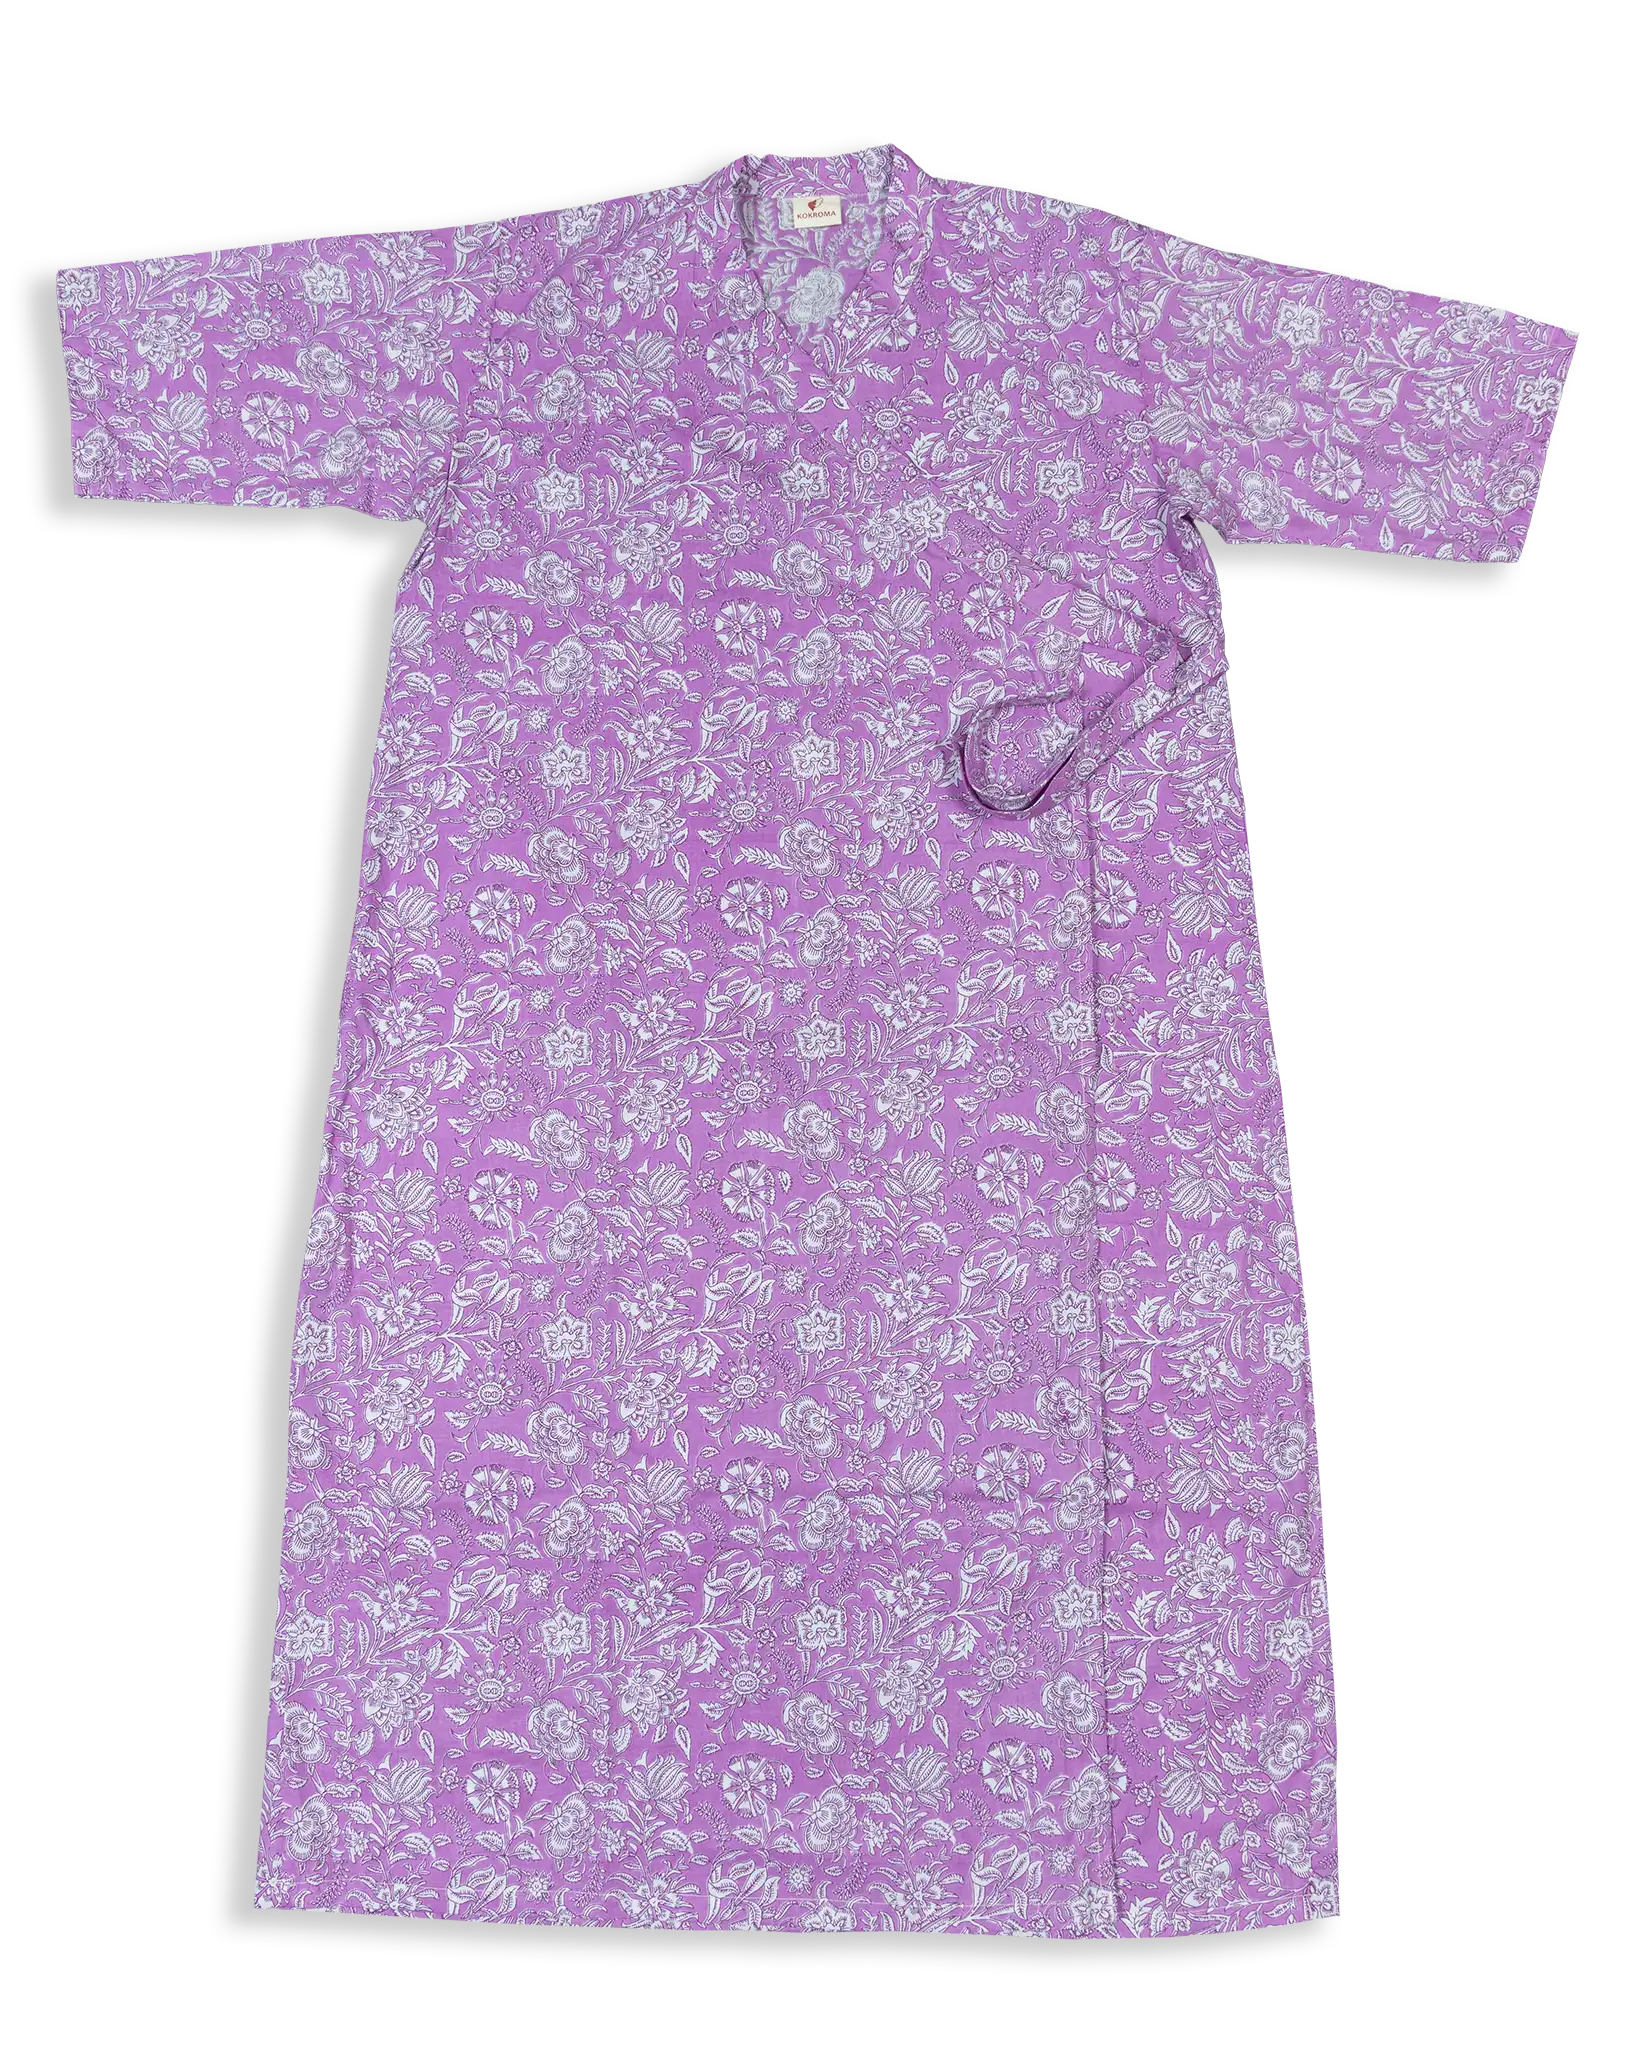 The Mother Gown made with 100% cotton with a print is a beautiful and comfortable addition to any mother's wardrobe. With its elegant design, soft cotton material, and easy-care fabric, this gown is the perfect choice for expecting or new mothers.